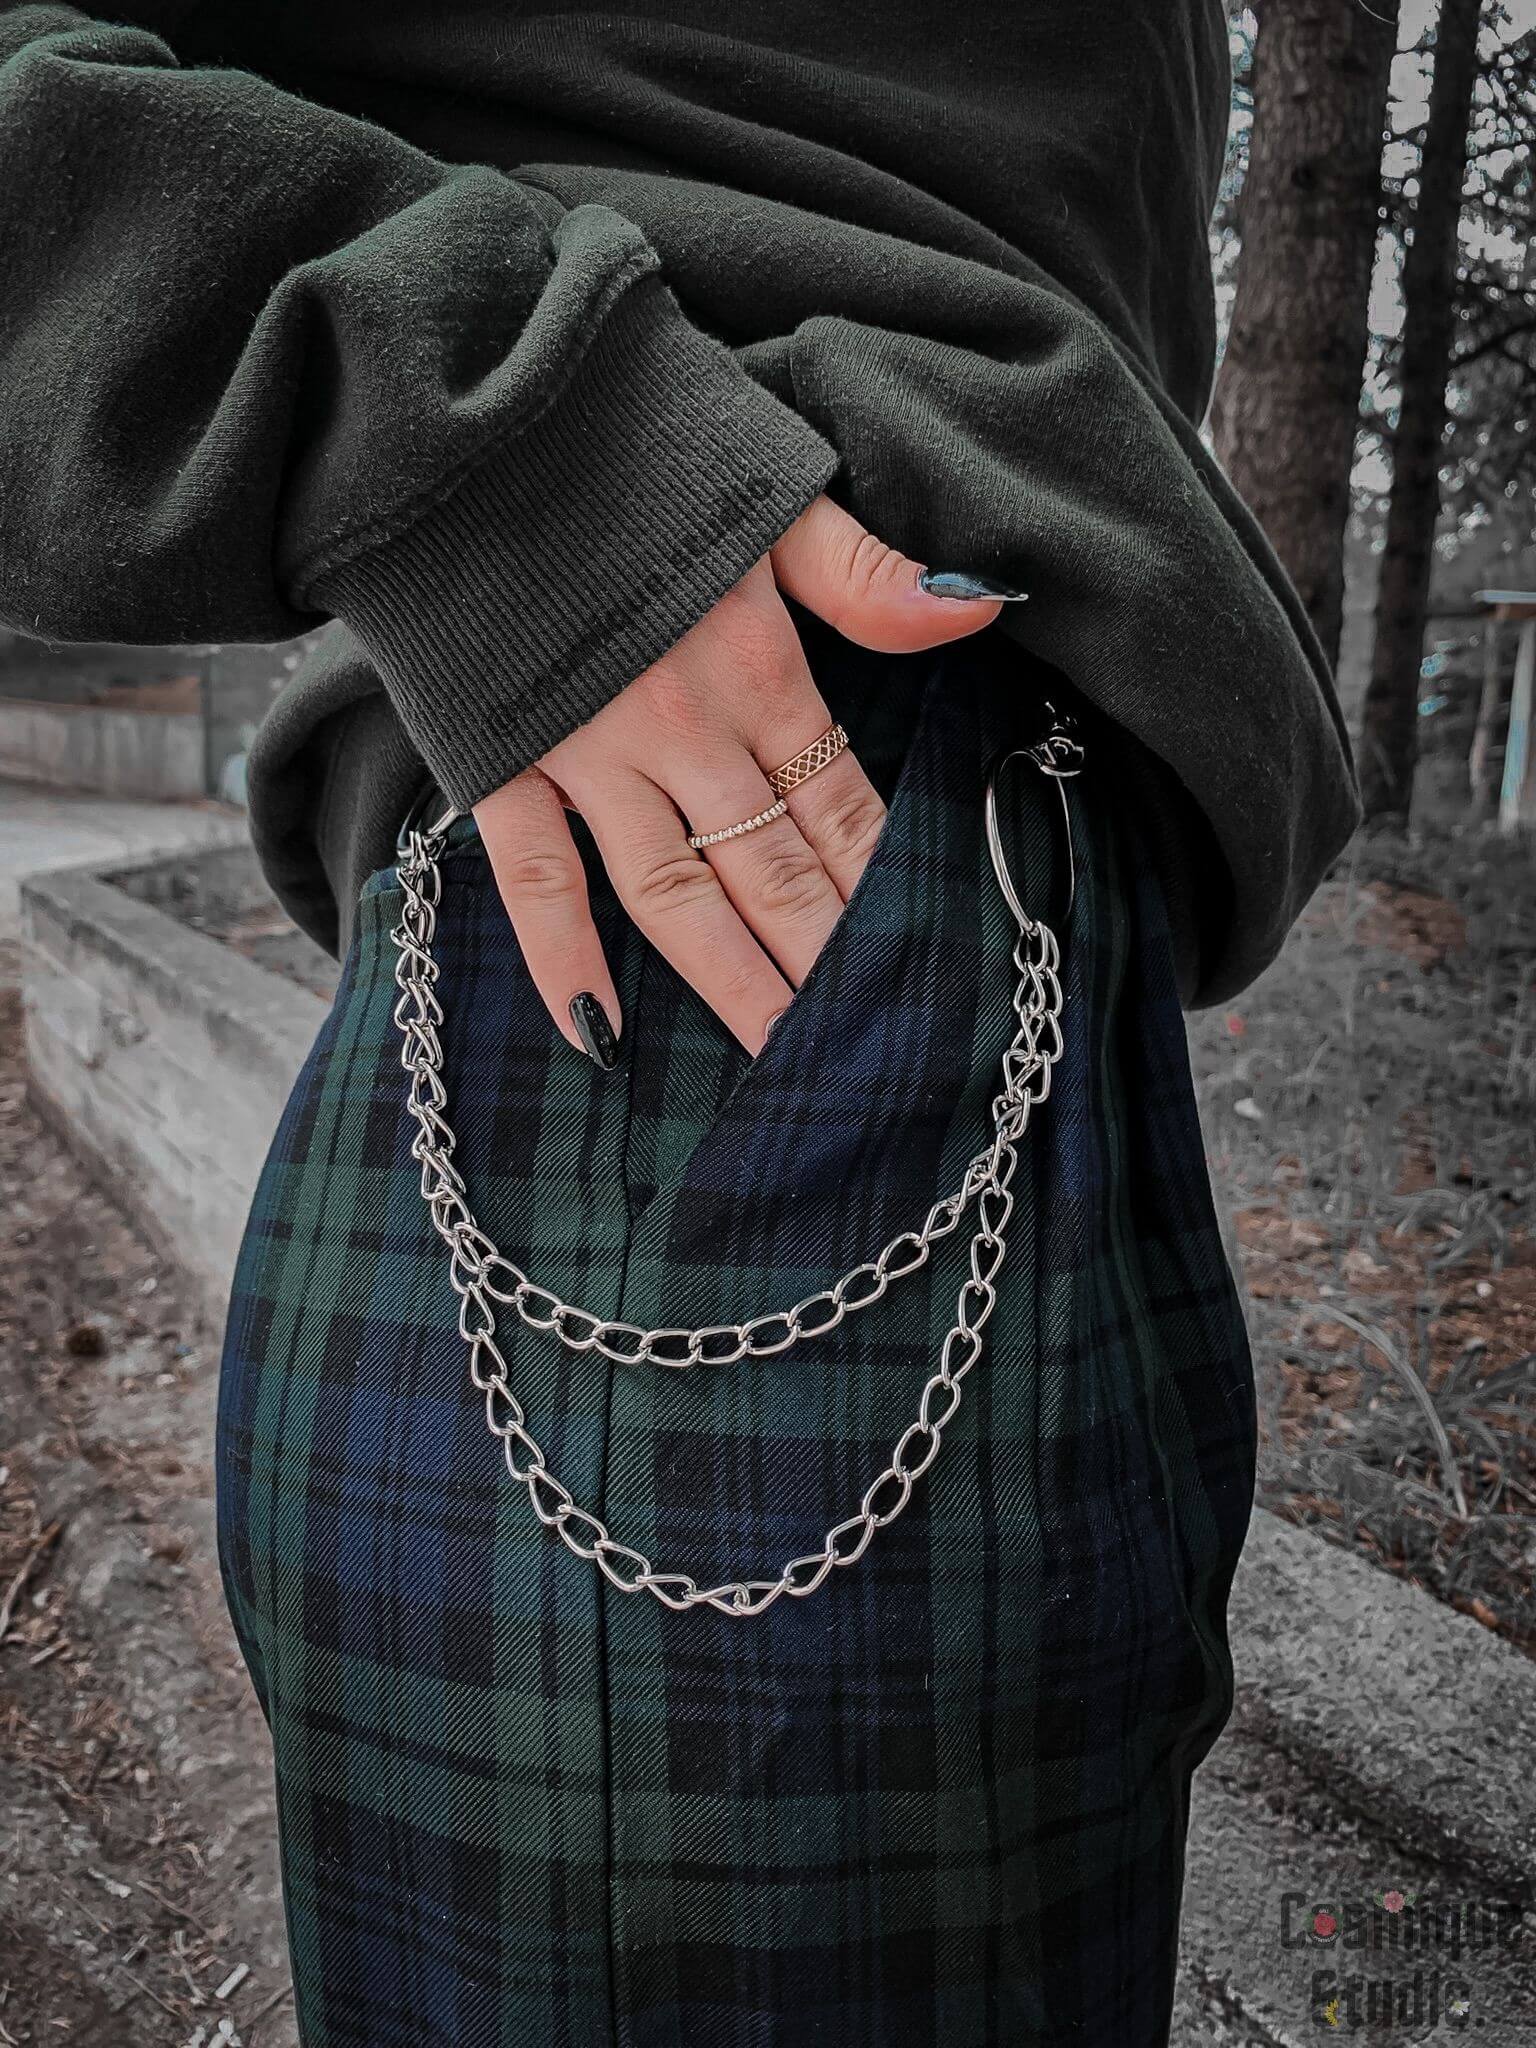 grunge chain belt combined with green grunge sweatshirt and baggy plaid pants